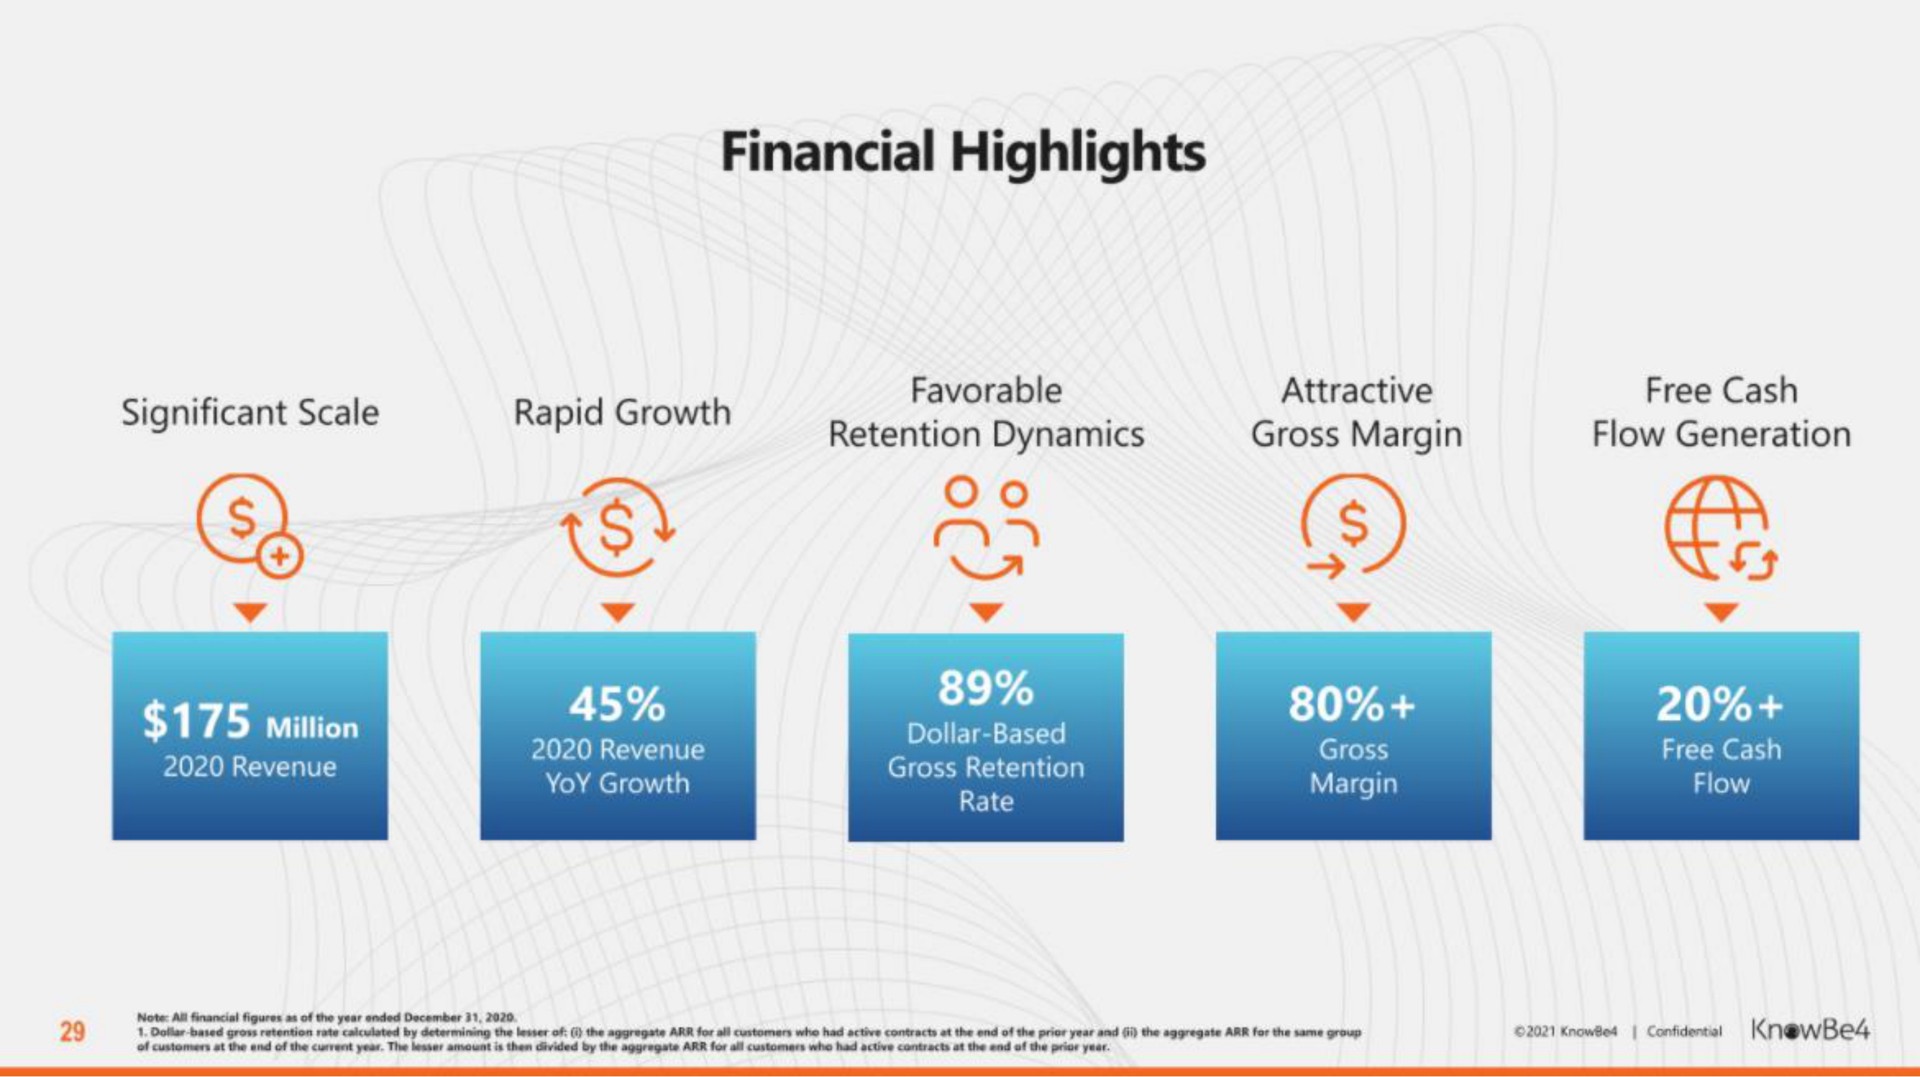 financial highlights is | KnowBe4